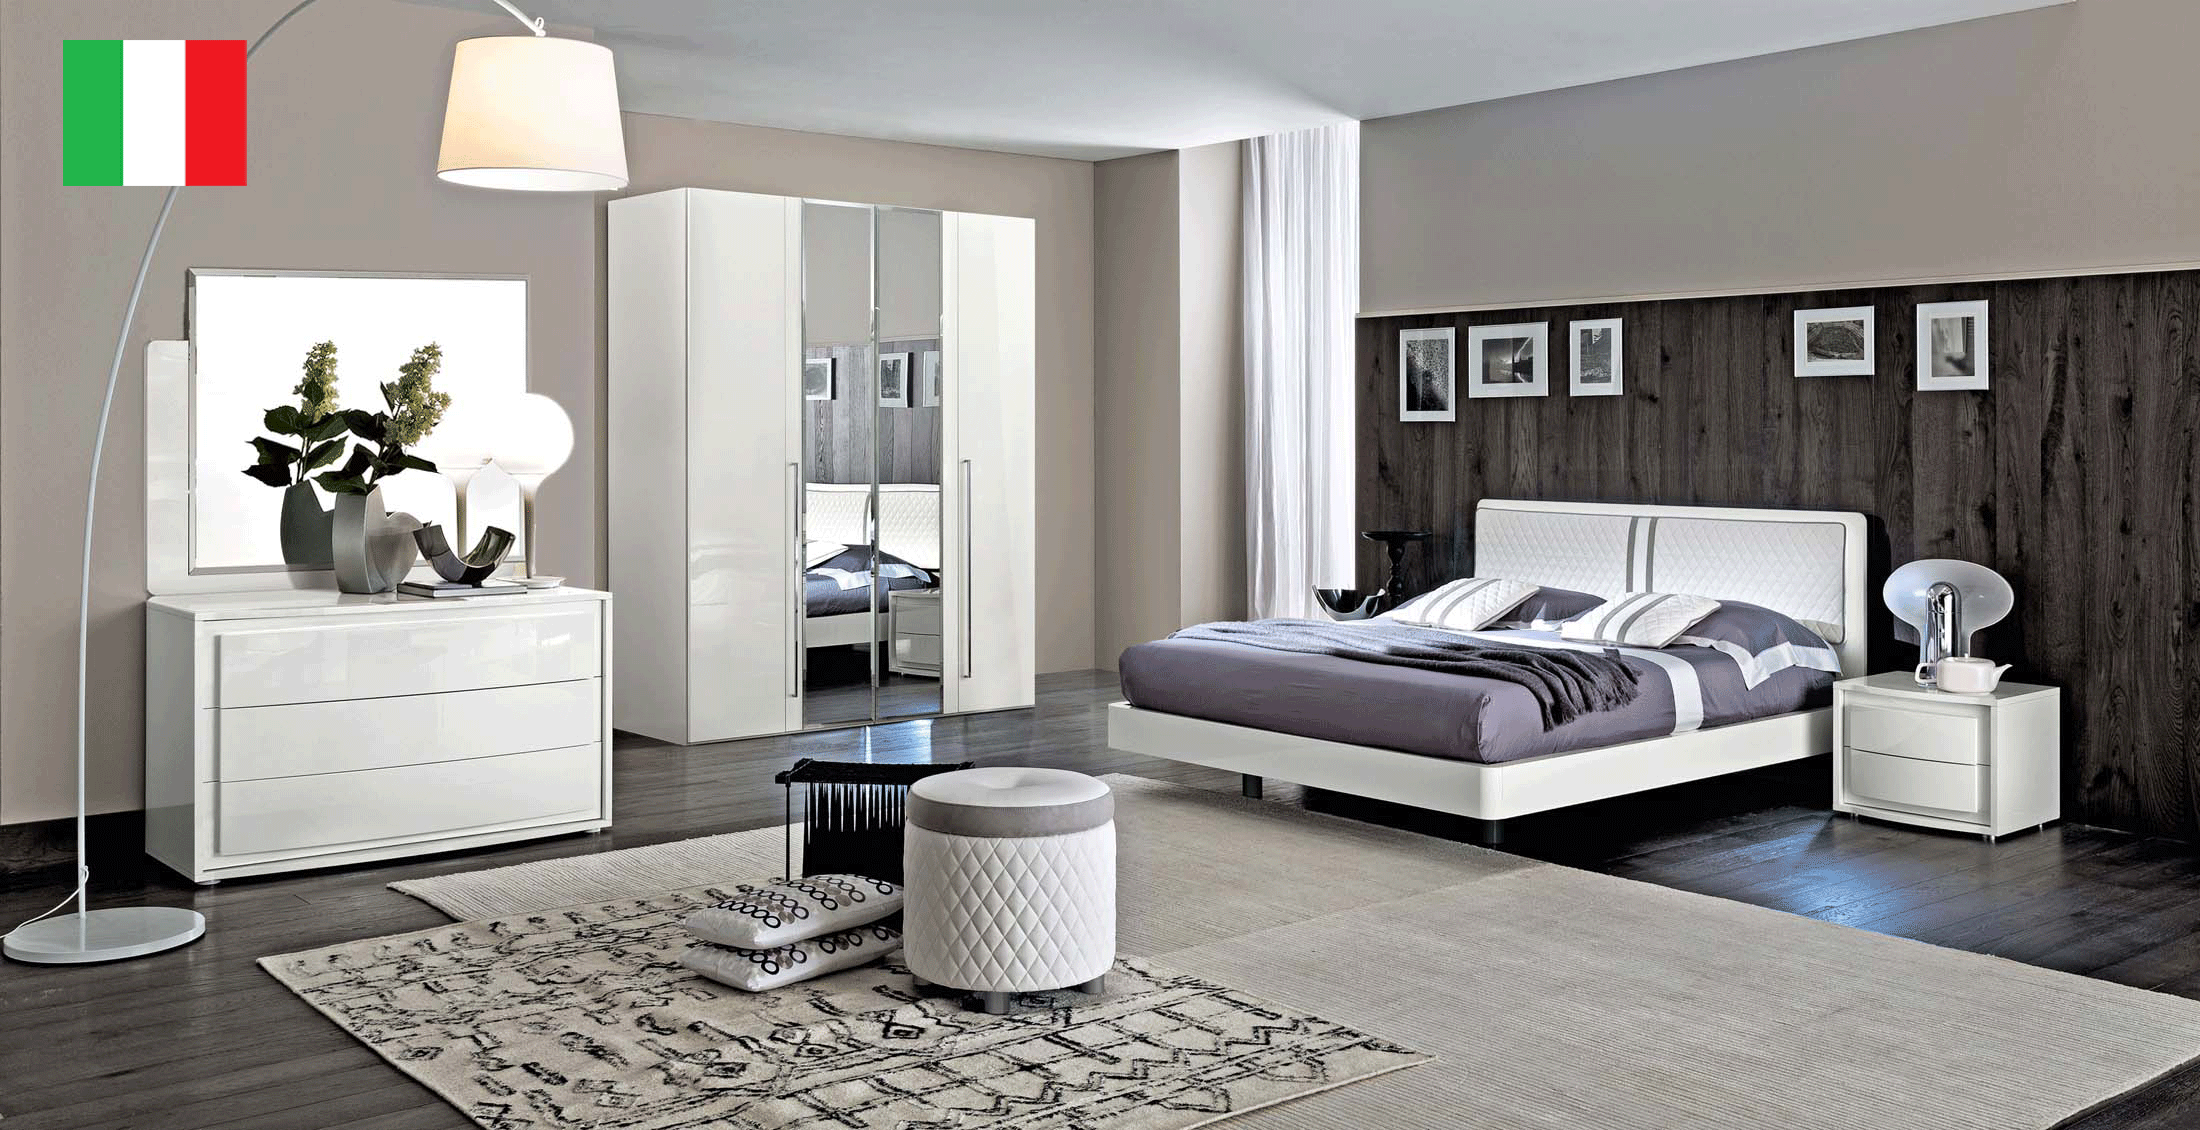 Brands Camel Classic Collection, Italy Dama Bianca Bedroom by CamelGroup Italy